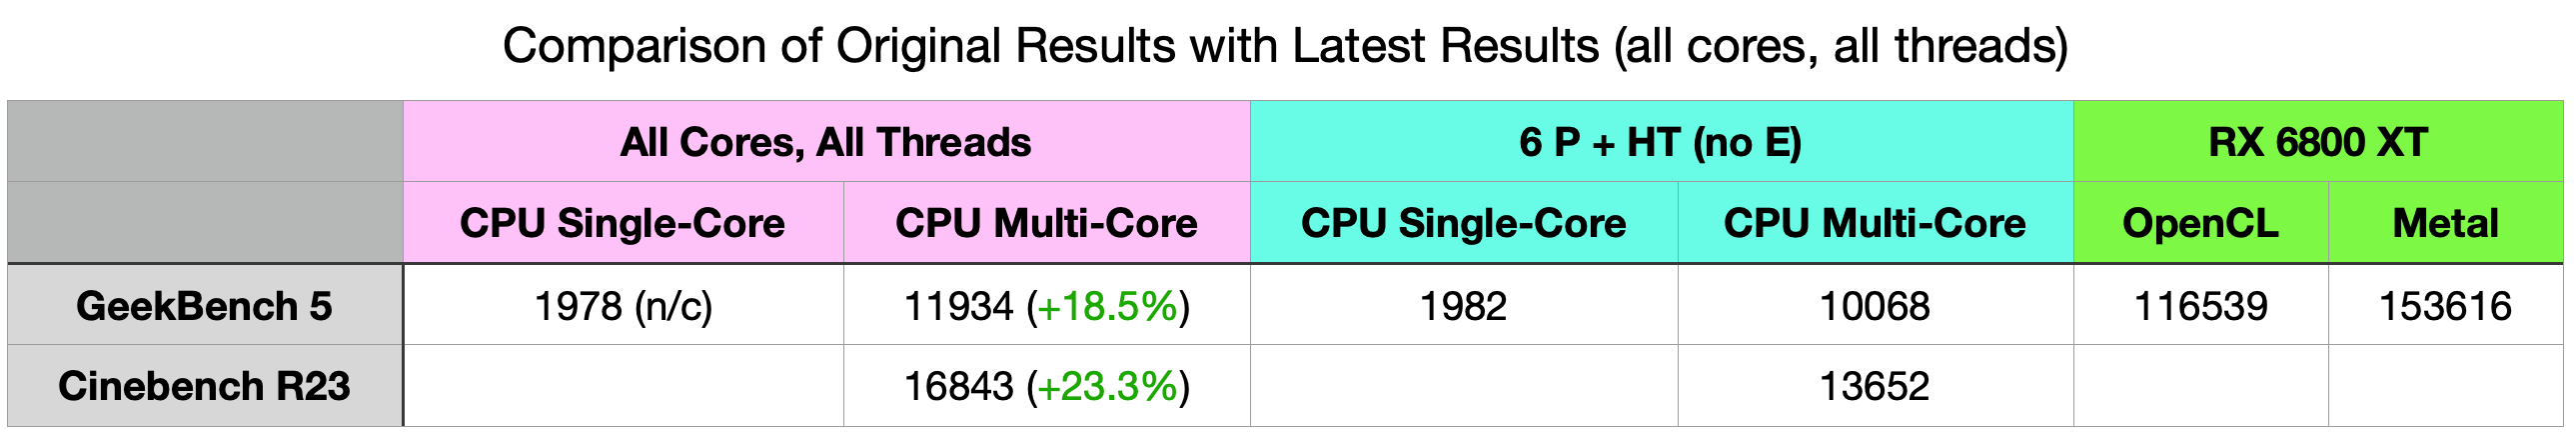 New mem - all cores all threads.png